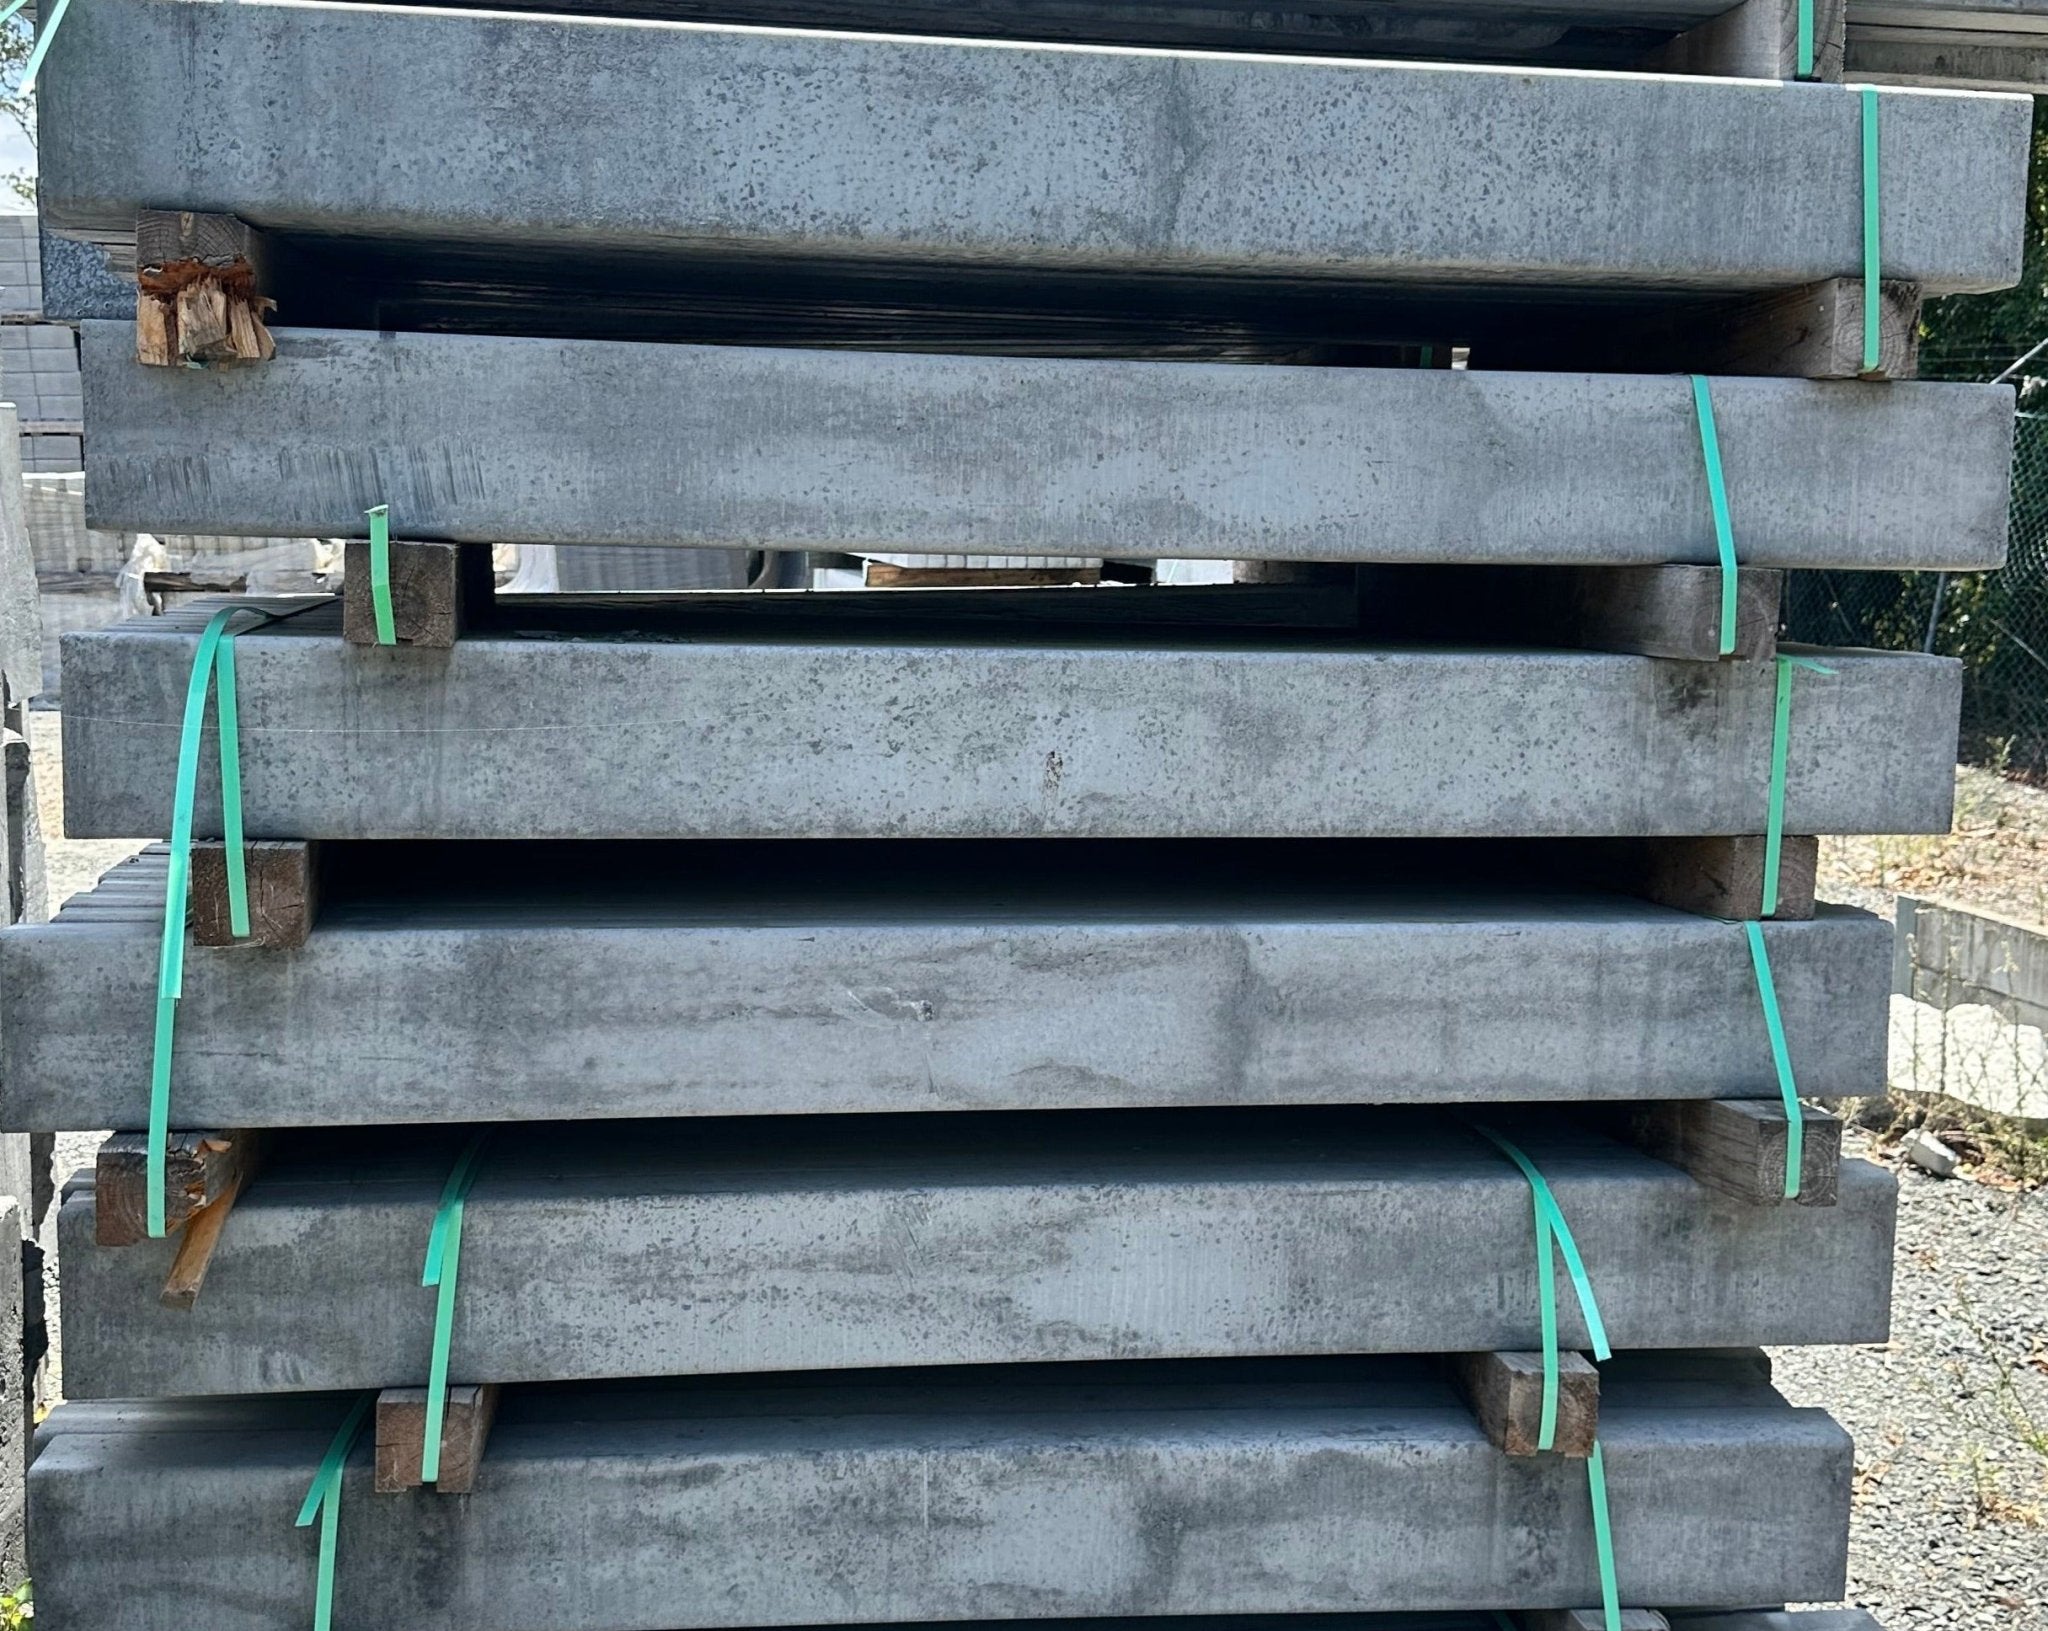 Plain Charcoal Concrete Sleepers (Seconds) - Surplus Traders Australia Buy Plain Charcoal Concrete Sleepers (Seconds) for only A$26.00 at Surplus Traders Australia!